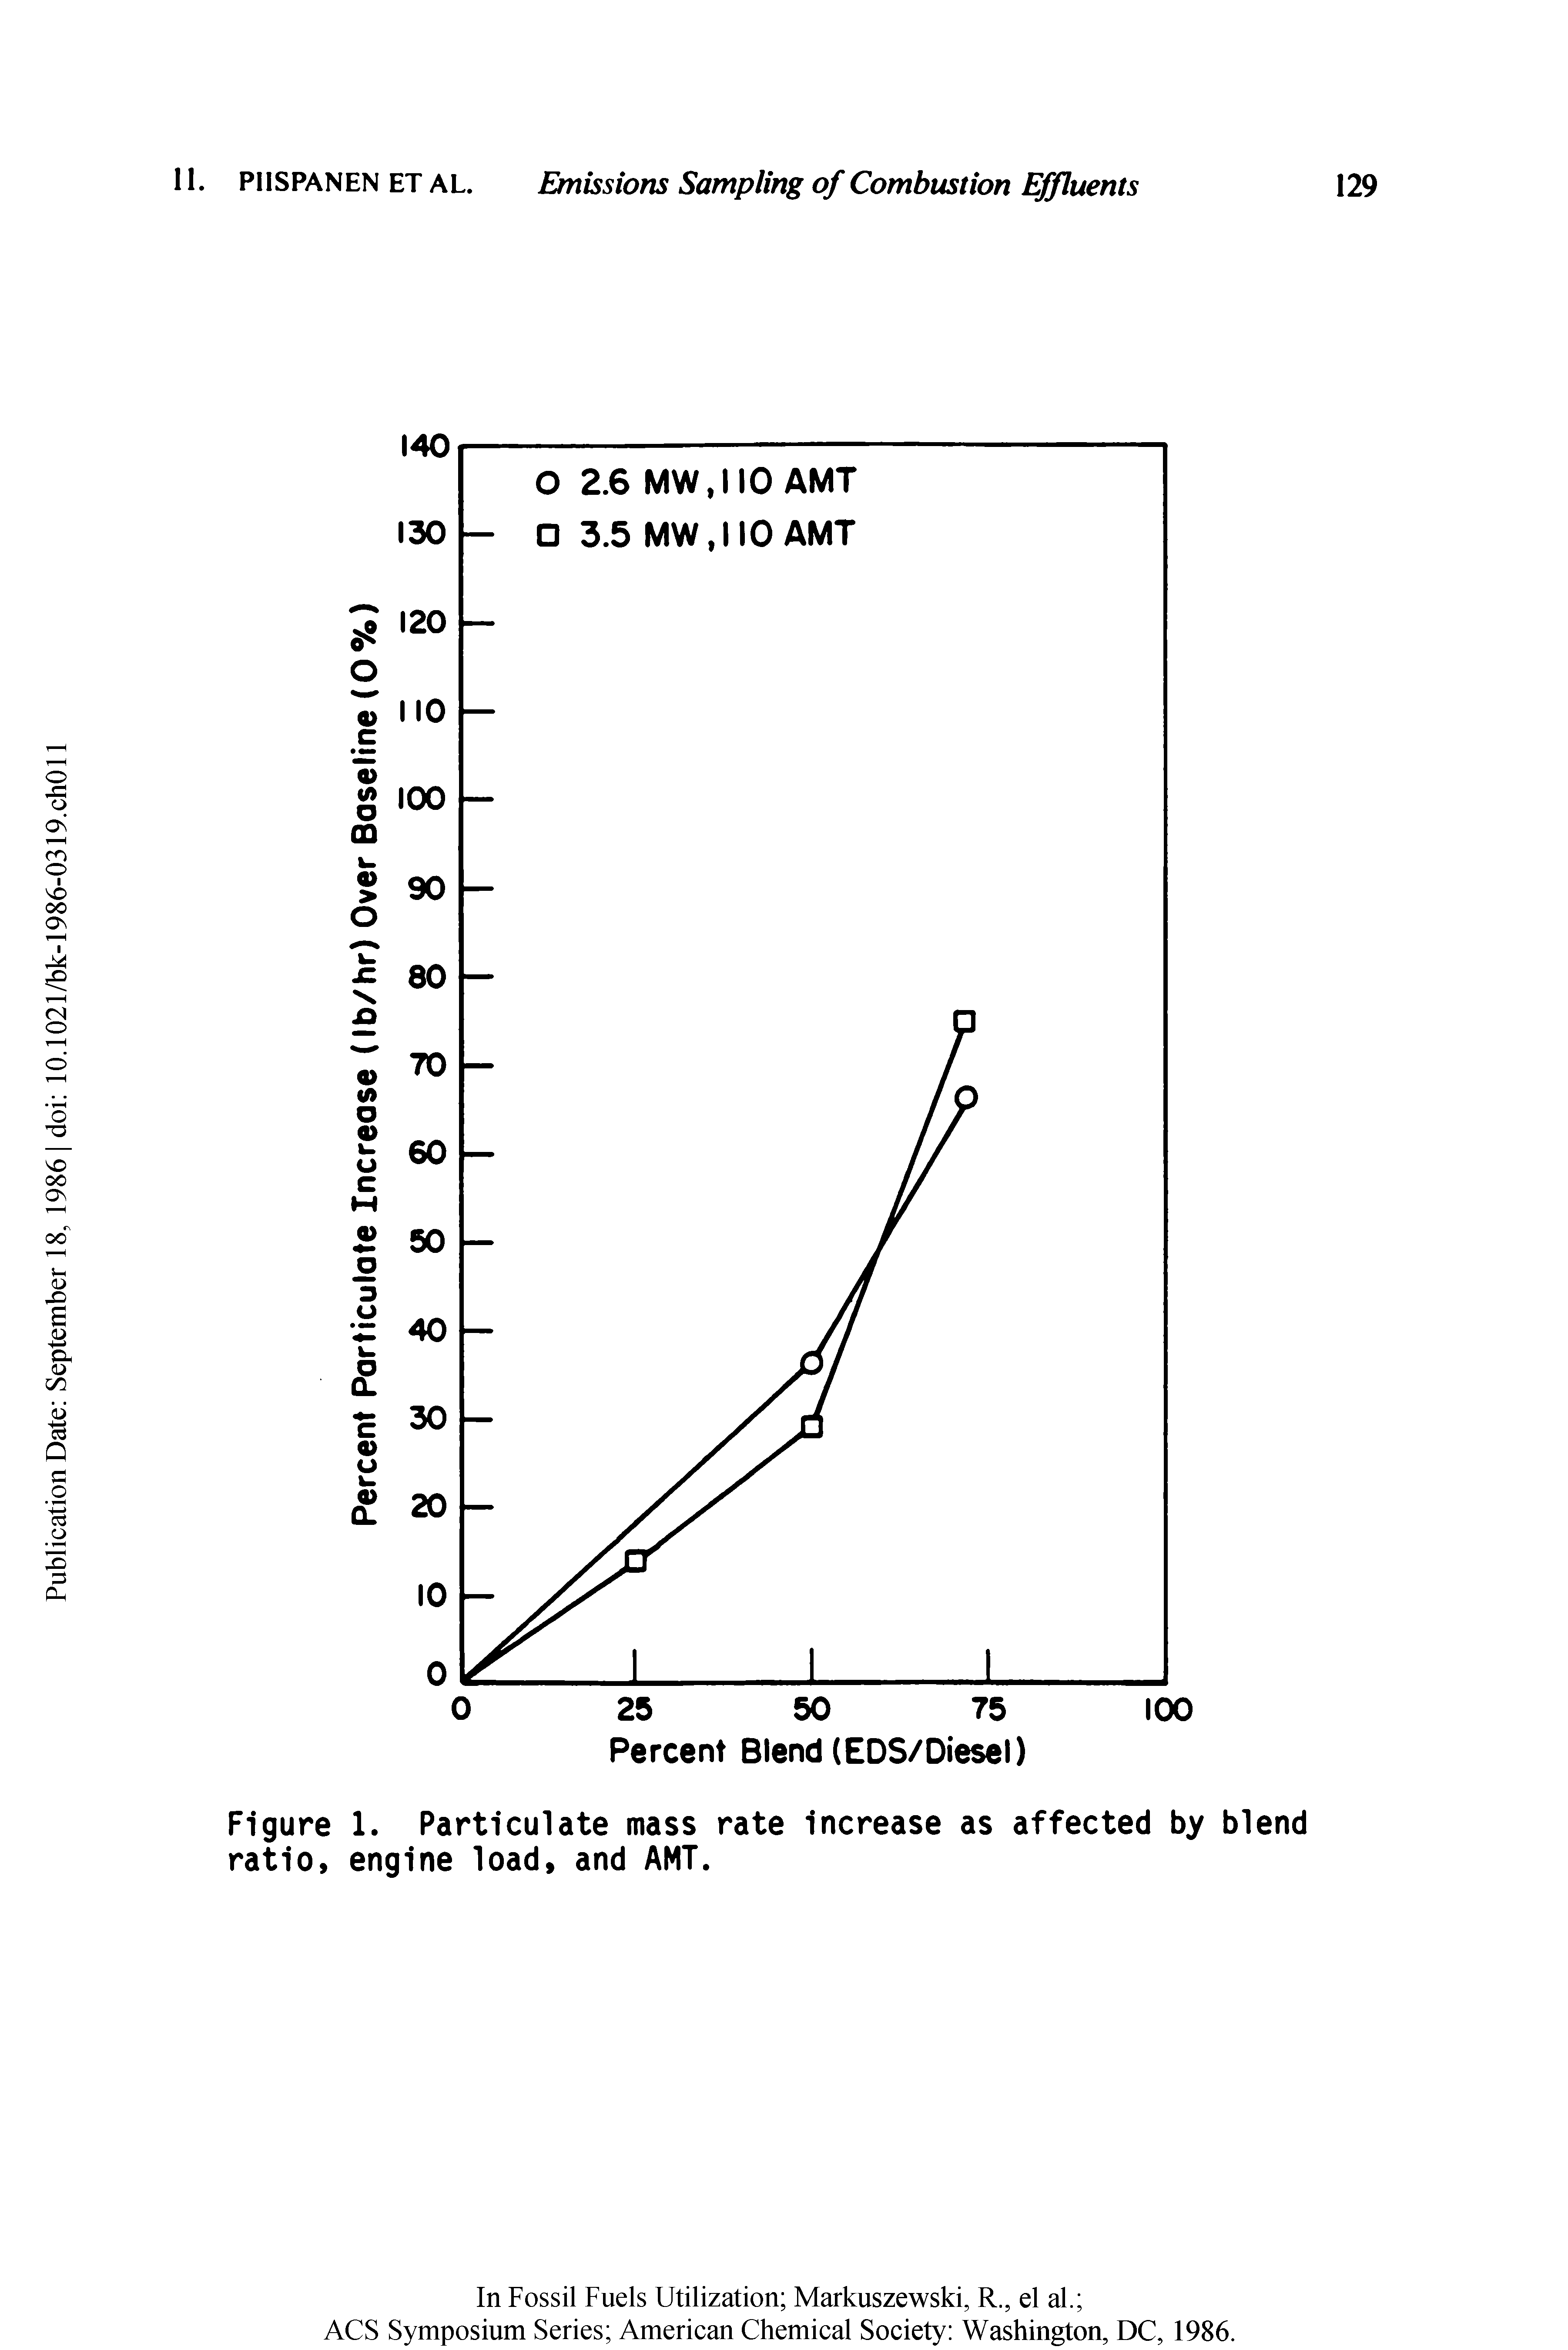 Figure 1. Particulate mass rate increase as affected by blend ratio, engine load, and AMT.